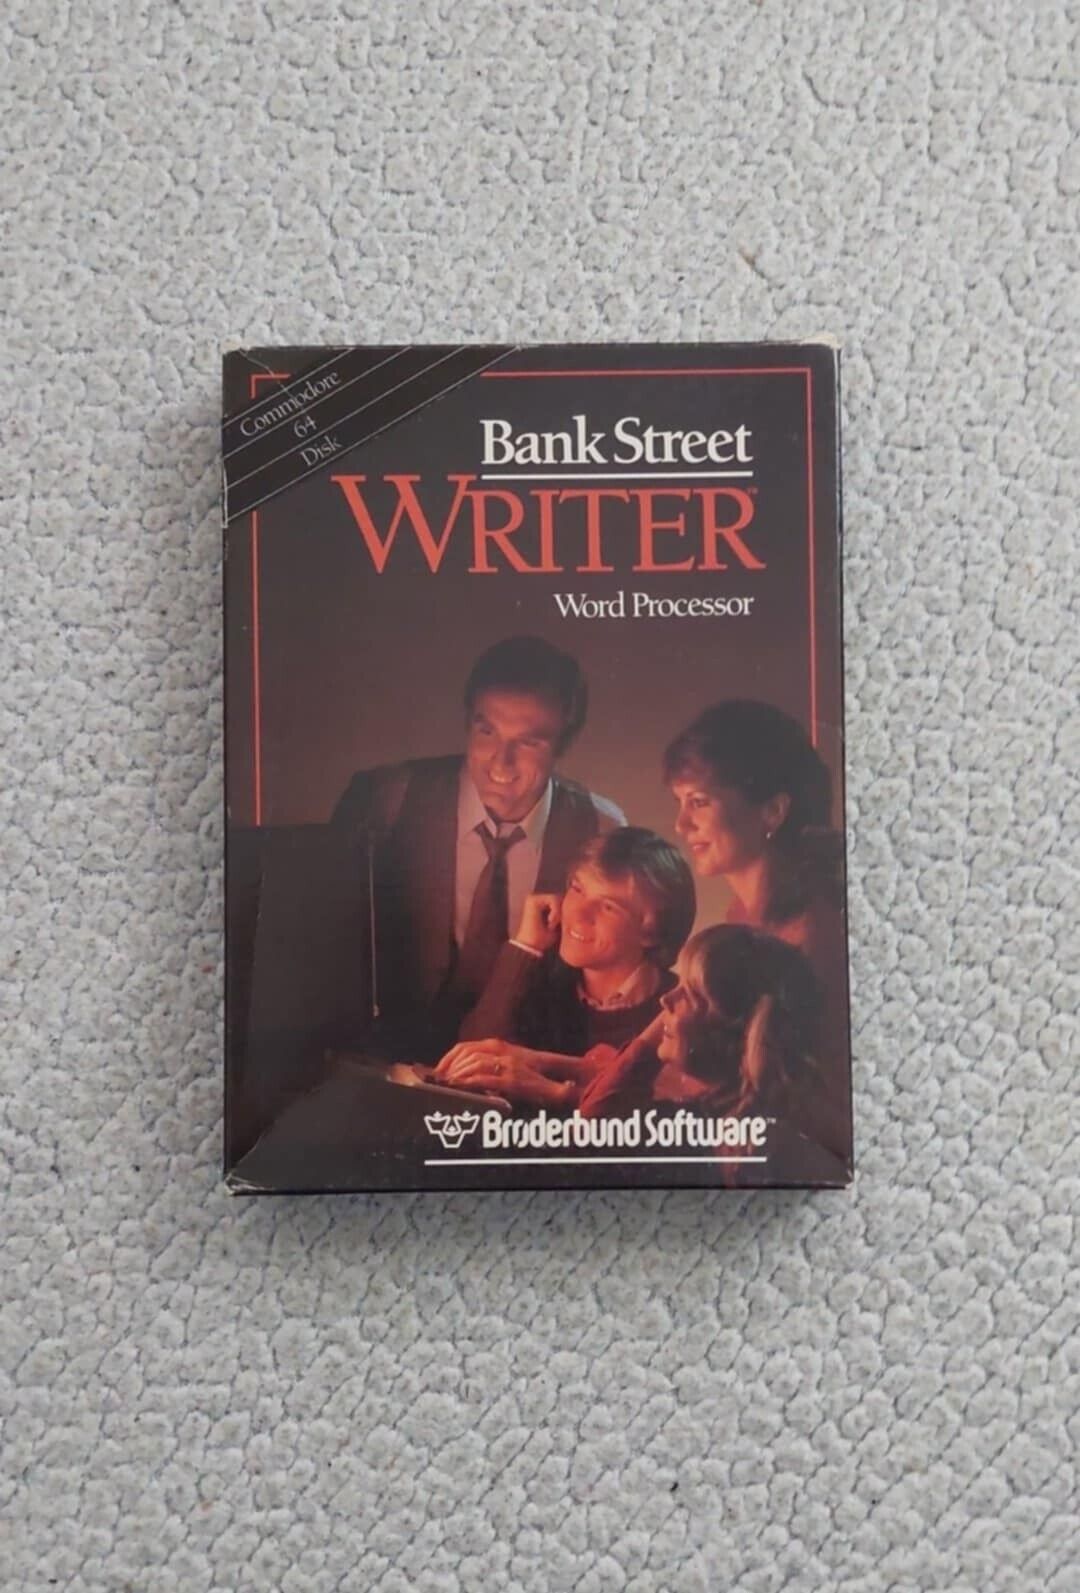 Bank Street Writer for Home Processor Commodore 64 by Broderbund